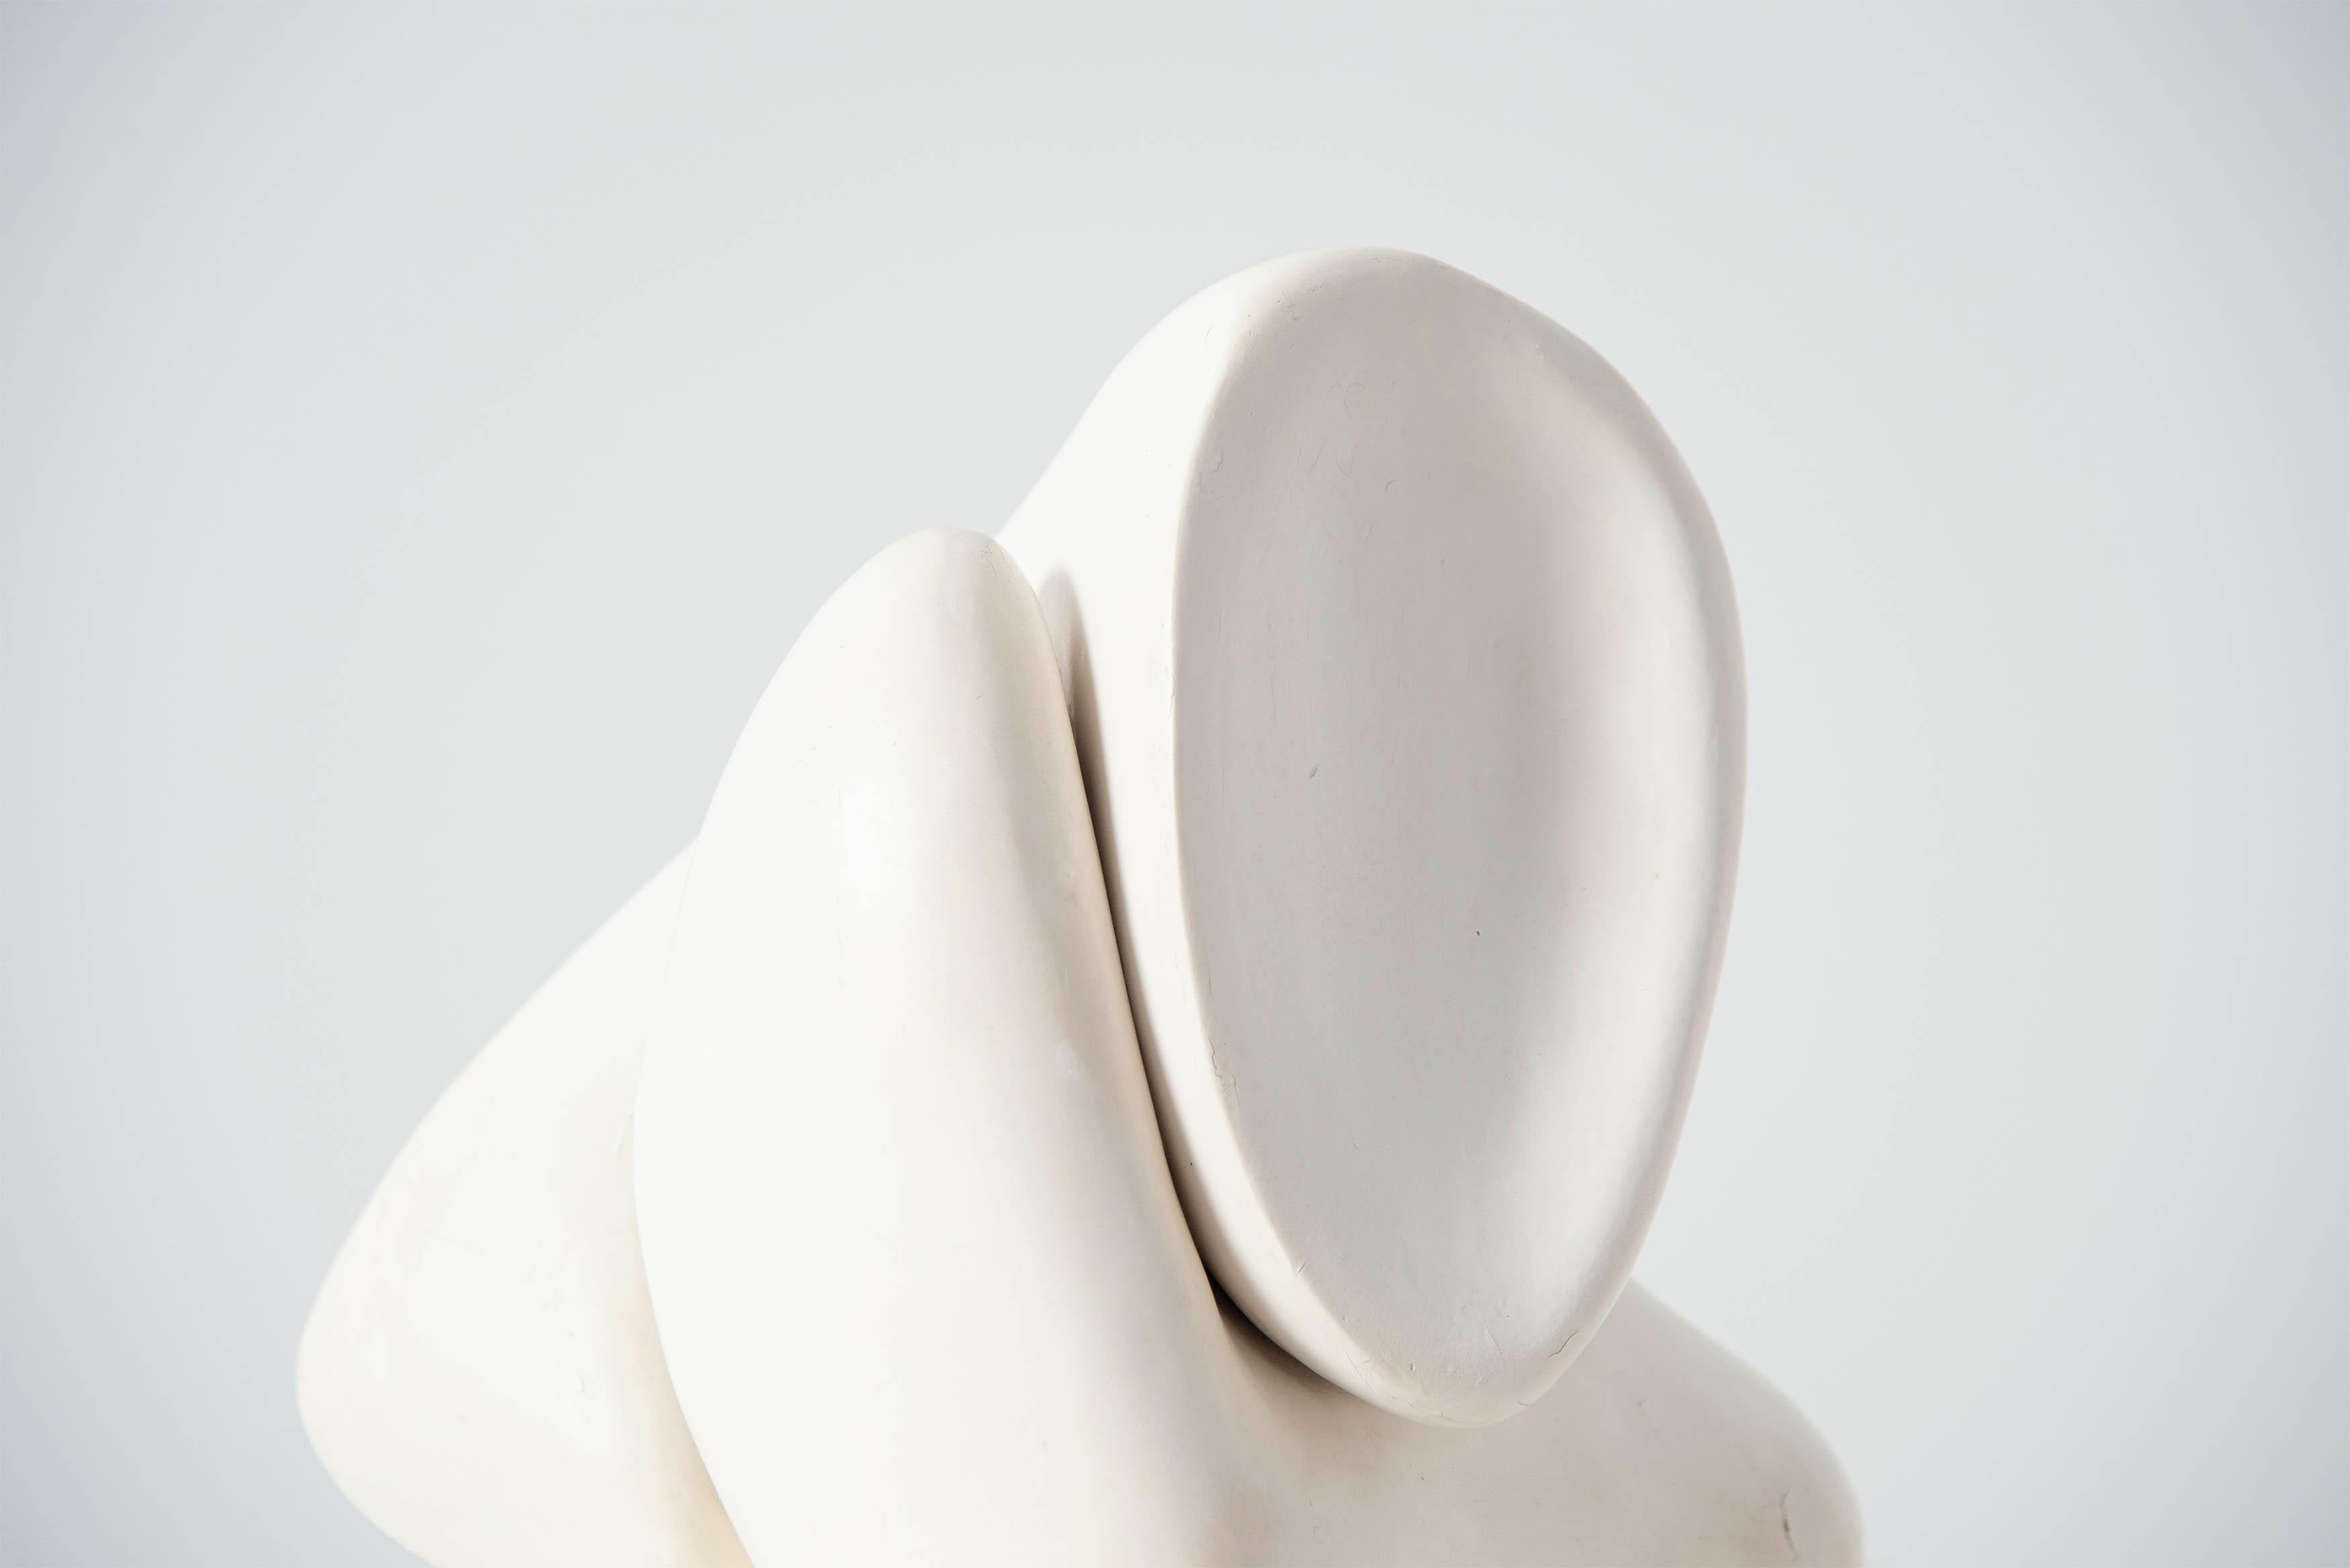 Beautiful abstract shaped plaster sculpture, made and sculpted by Hans van Eerd, Holland 1976. This sculpture was aquired directly from the artist who kept some of his best works from his early period, this was one of them. It is made of white